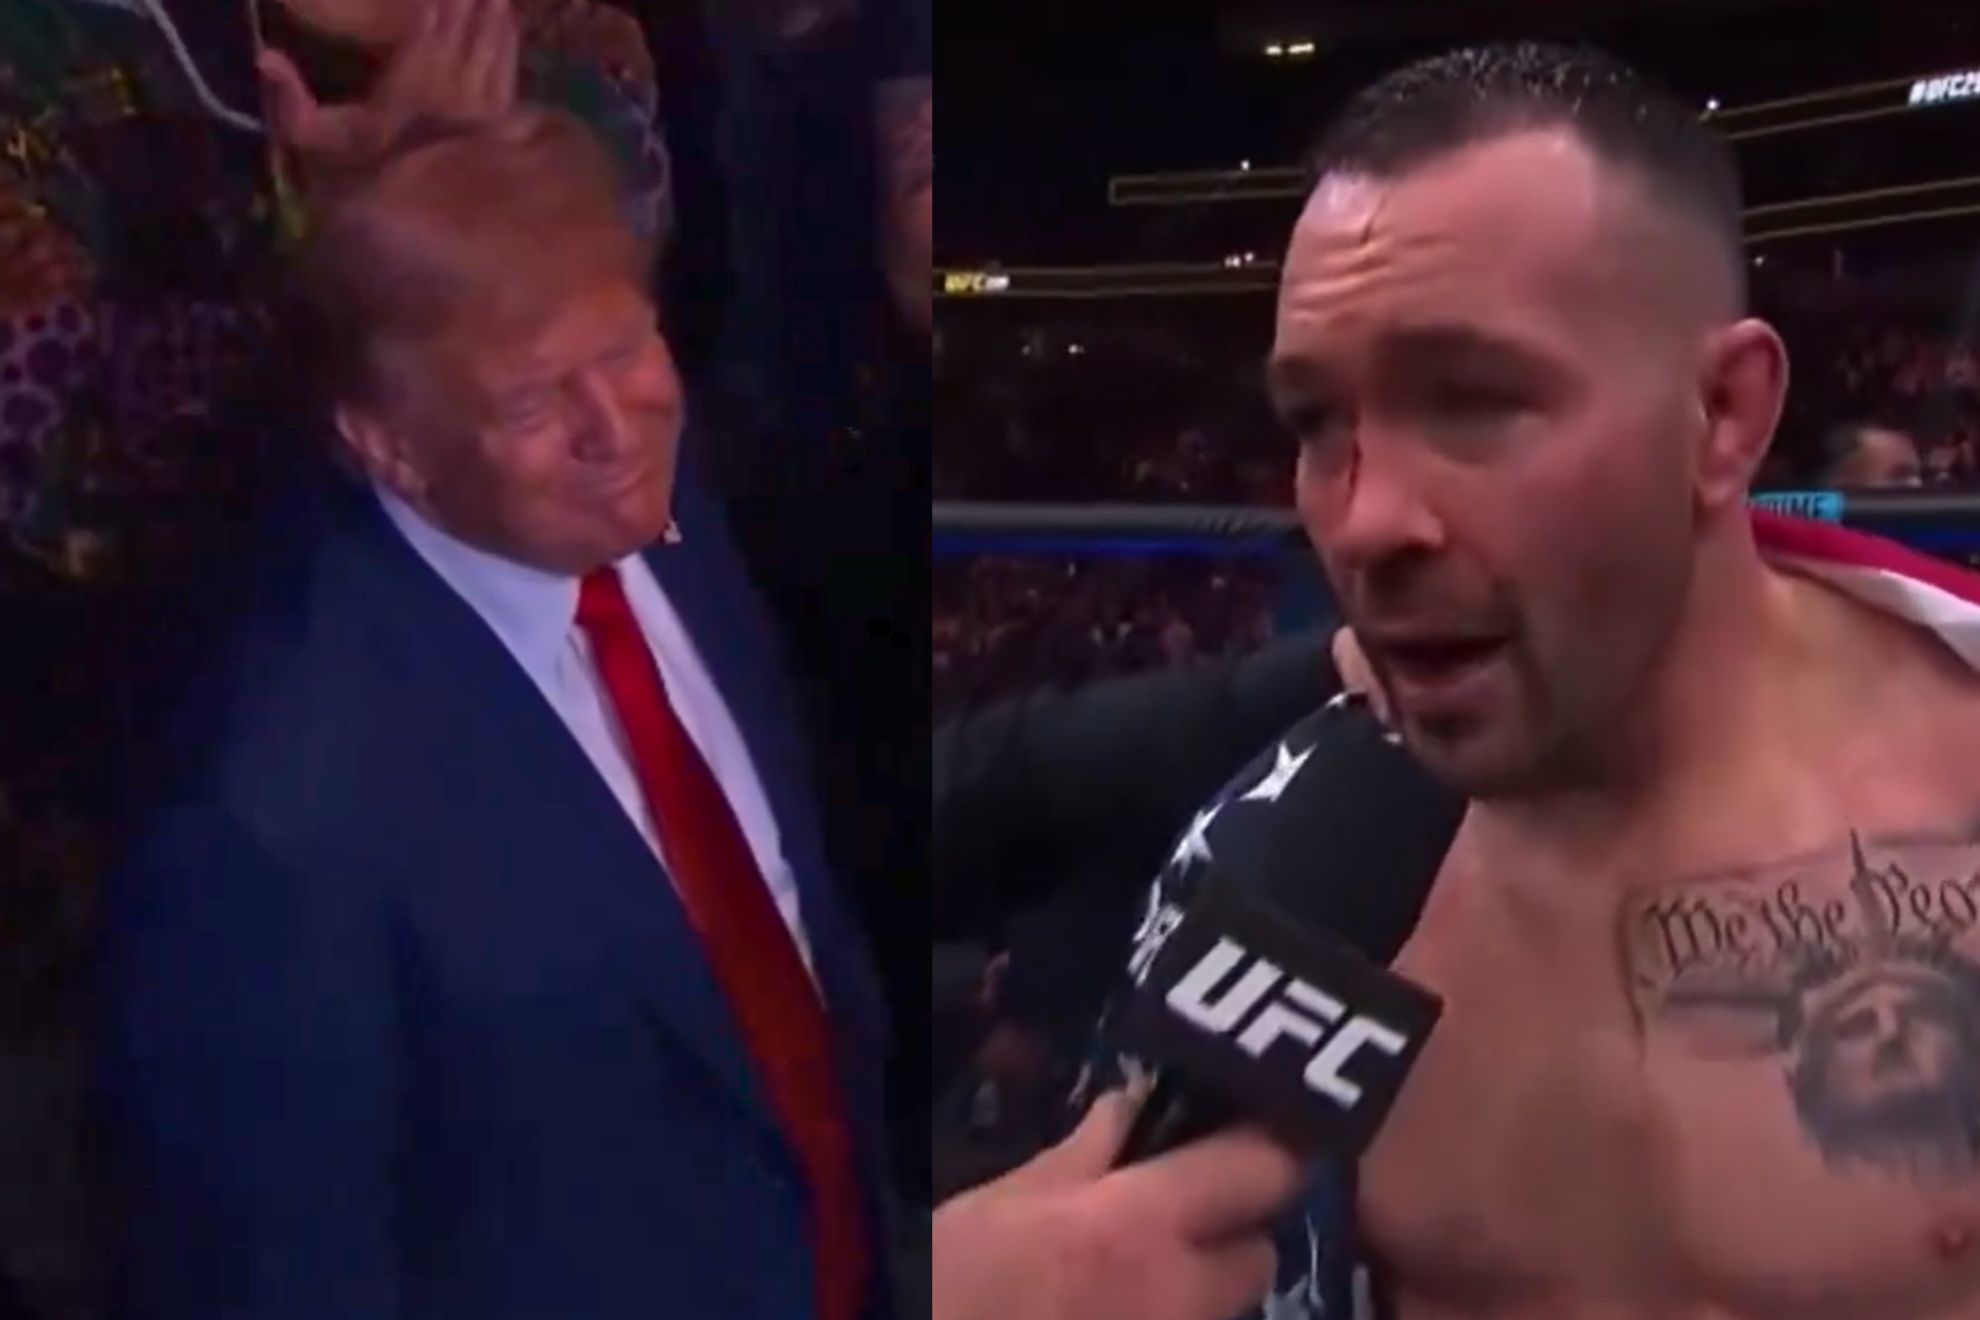 Donald Trump attended UFC 296, but his supporter Colby Covington lost heavily in main event.